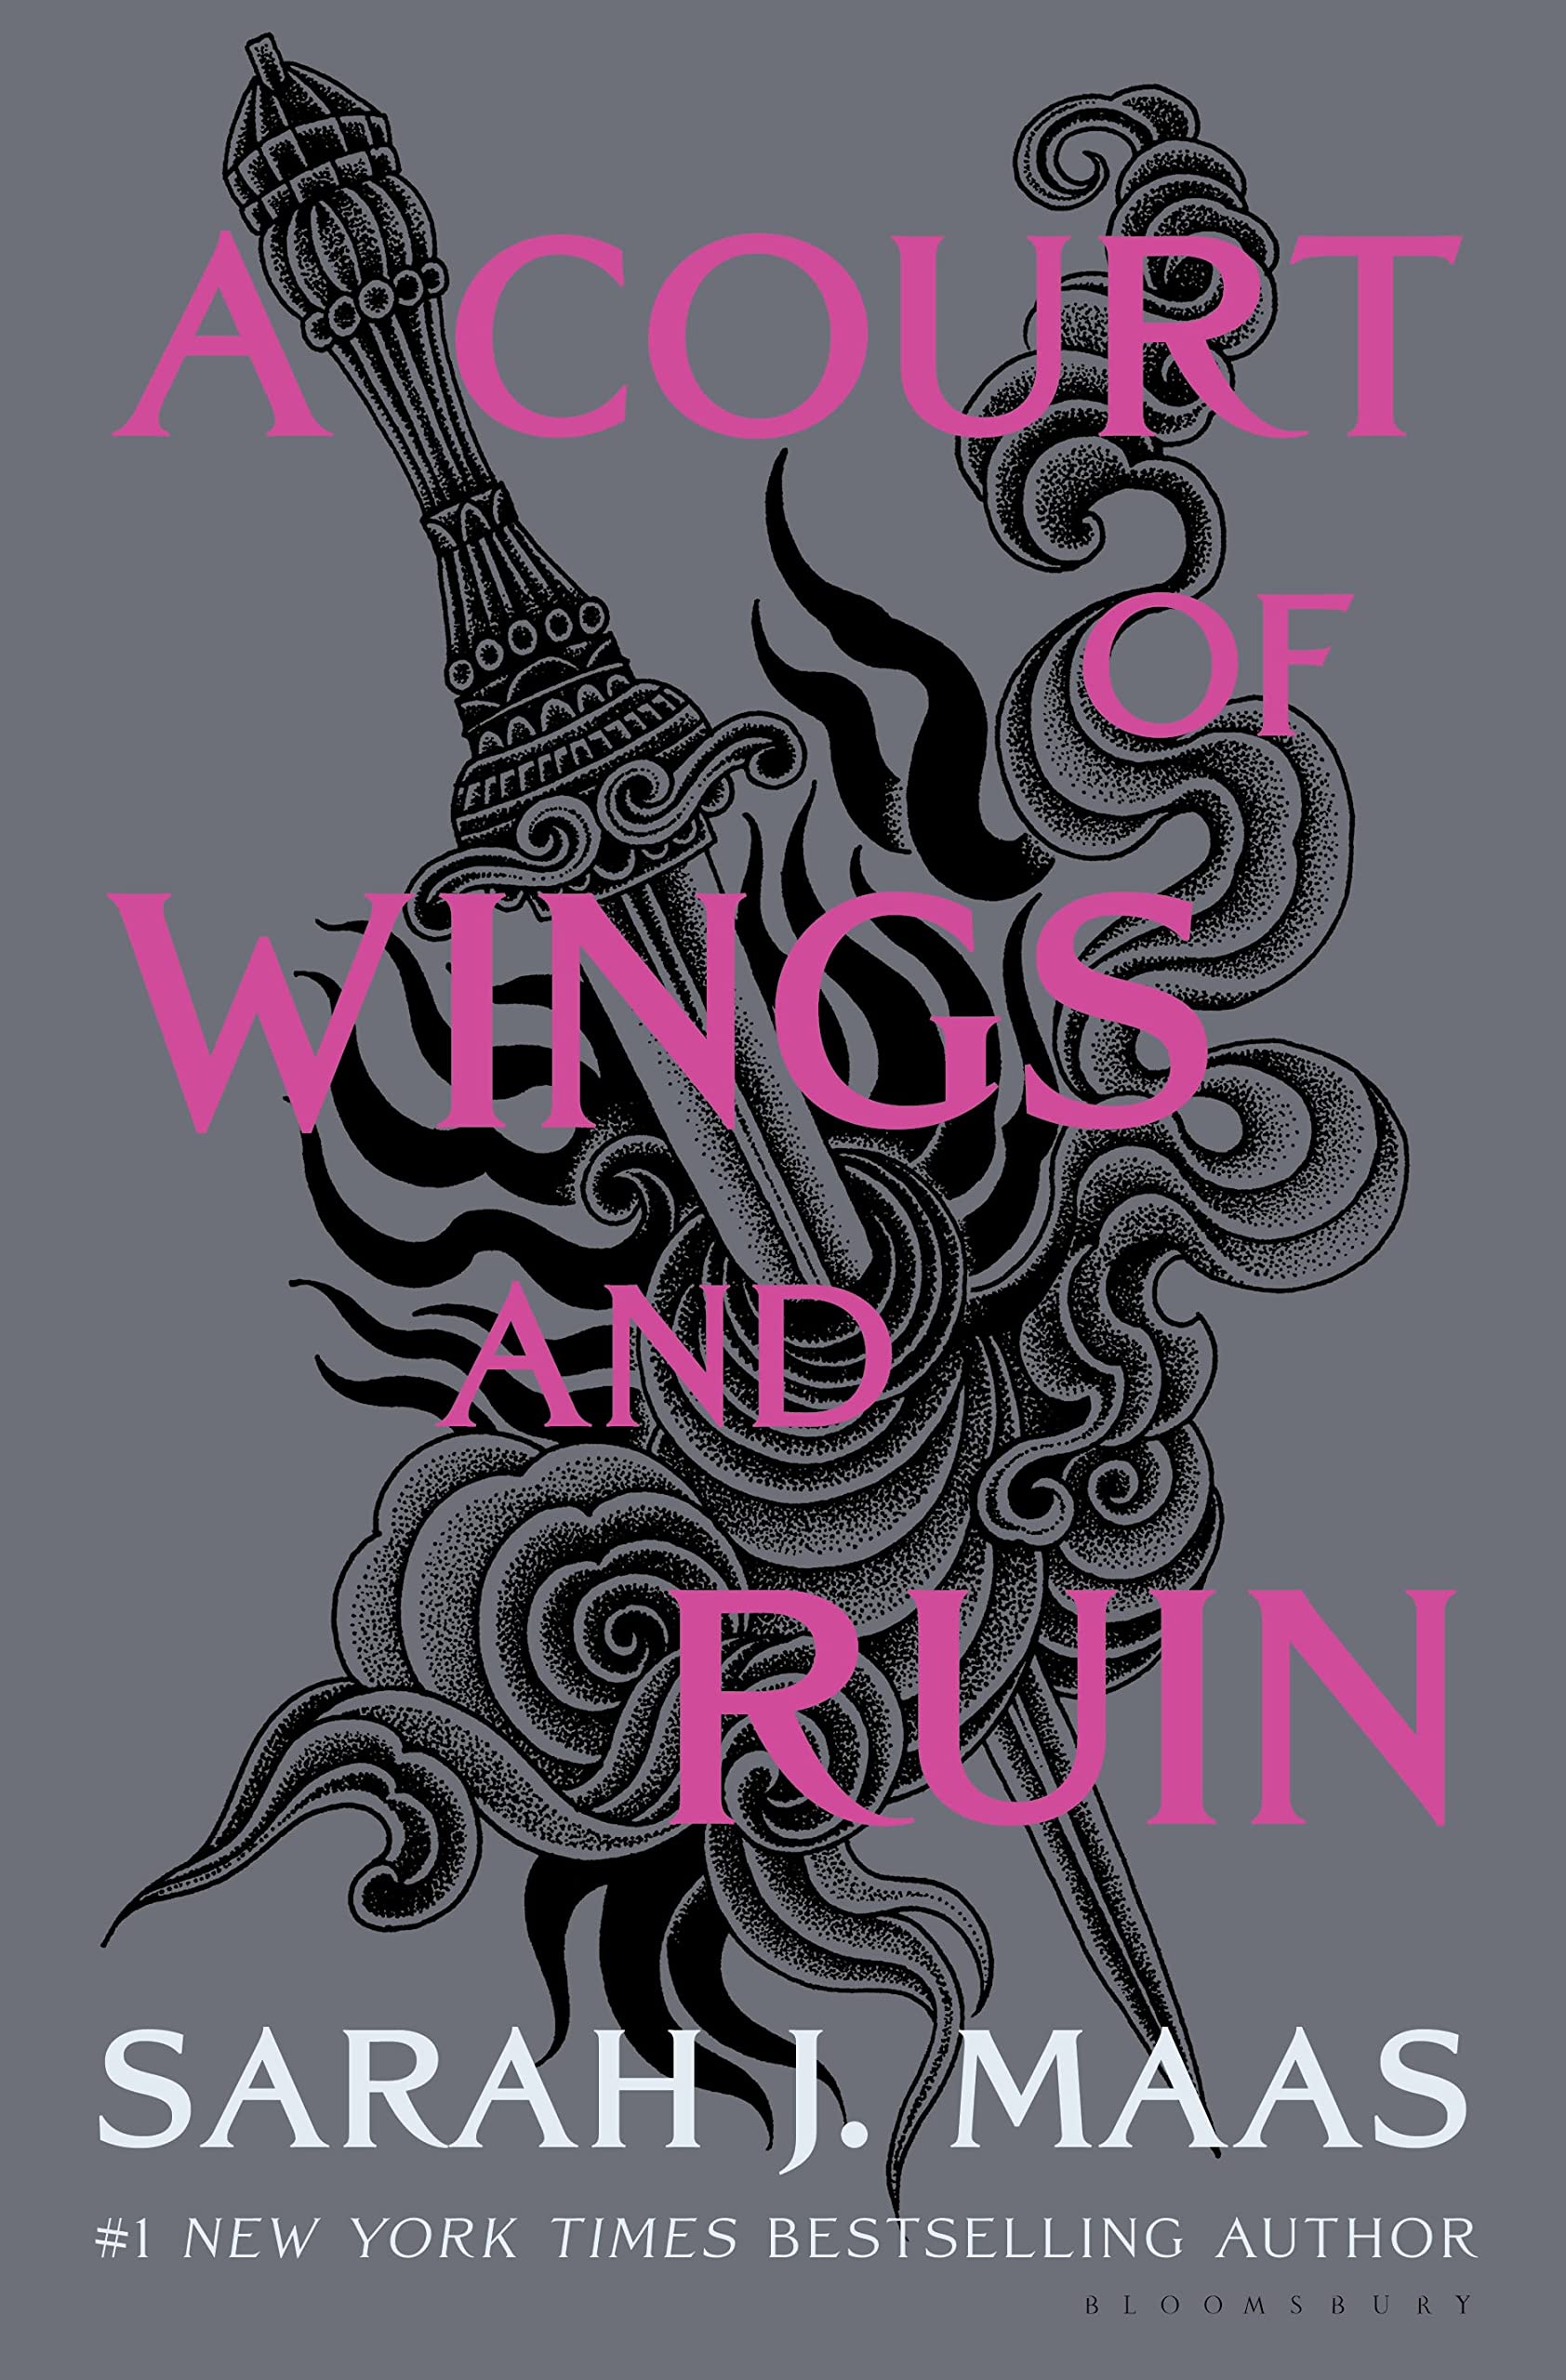 A Court of Wings and Ruin by Maas, Sarah J.